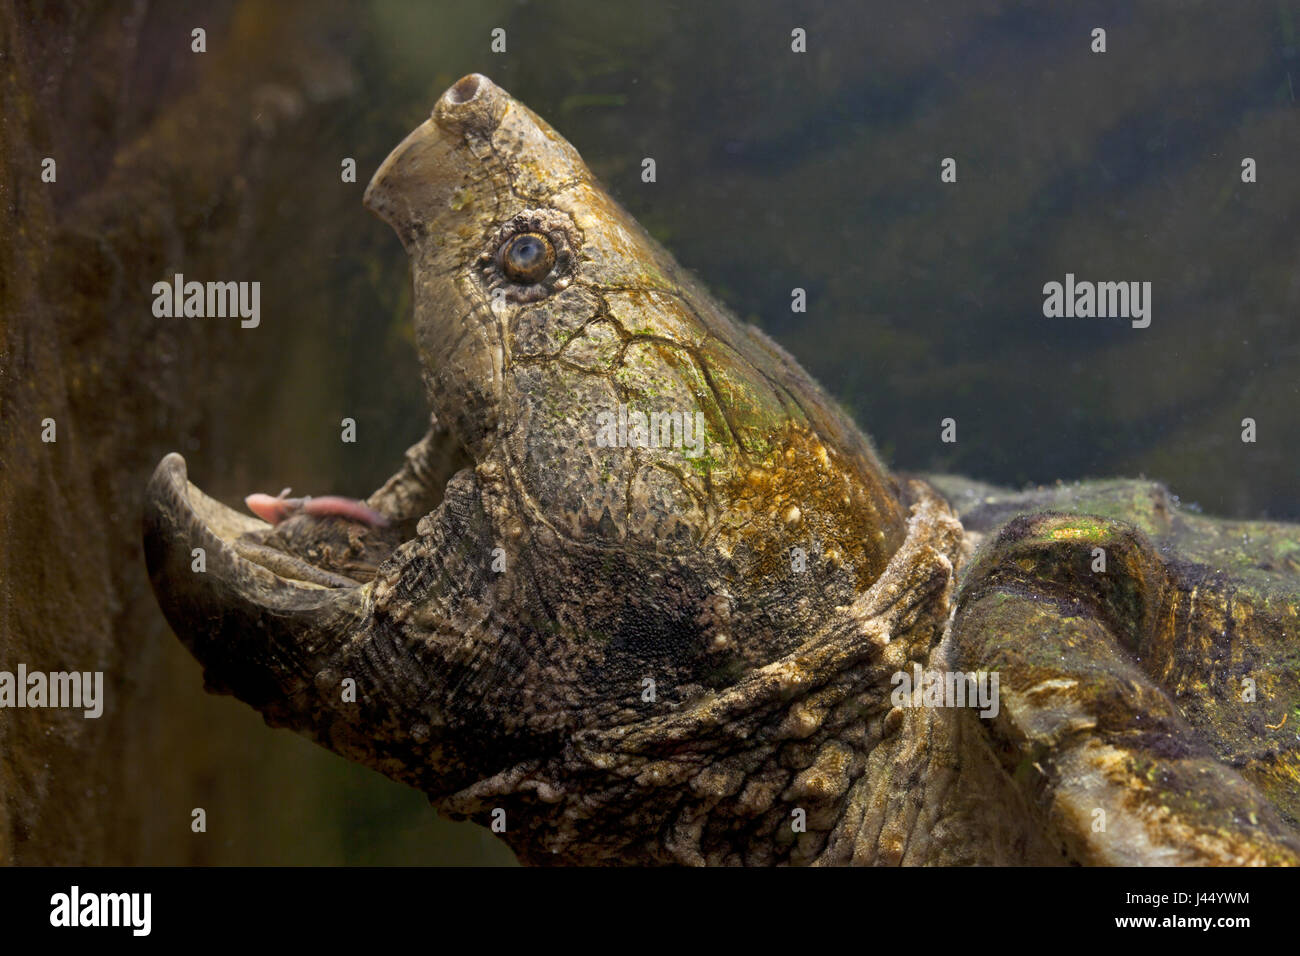 Close-up of an Alligator snapping turtle Stock Photo